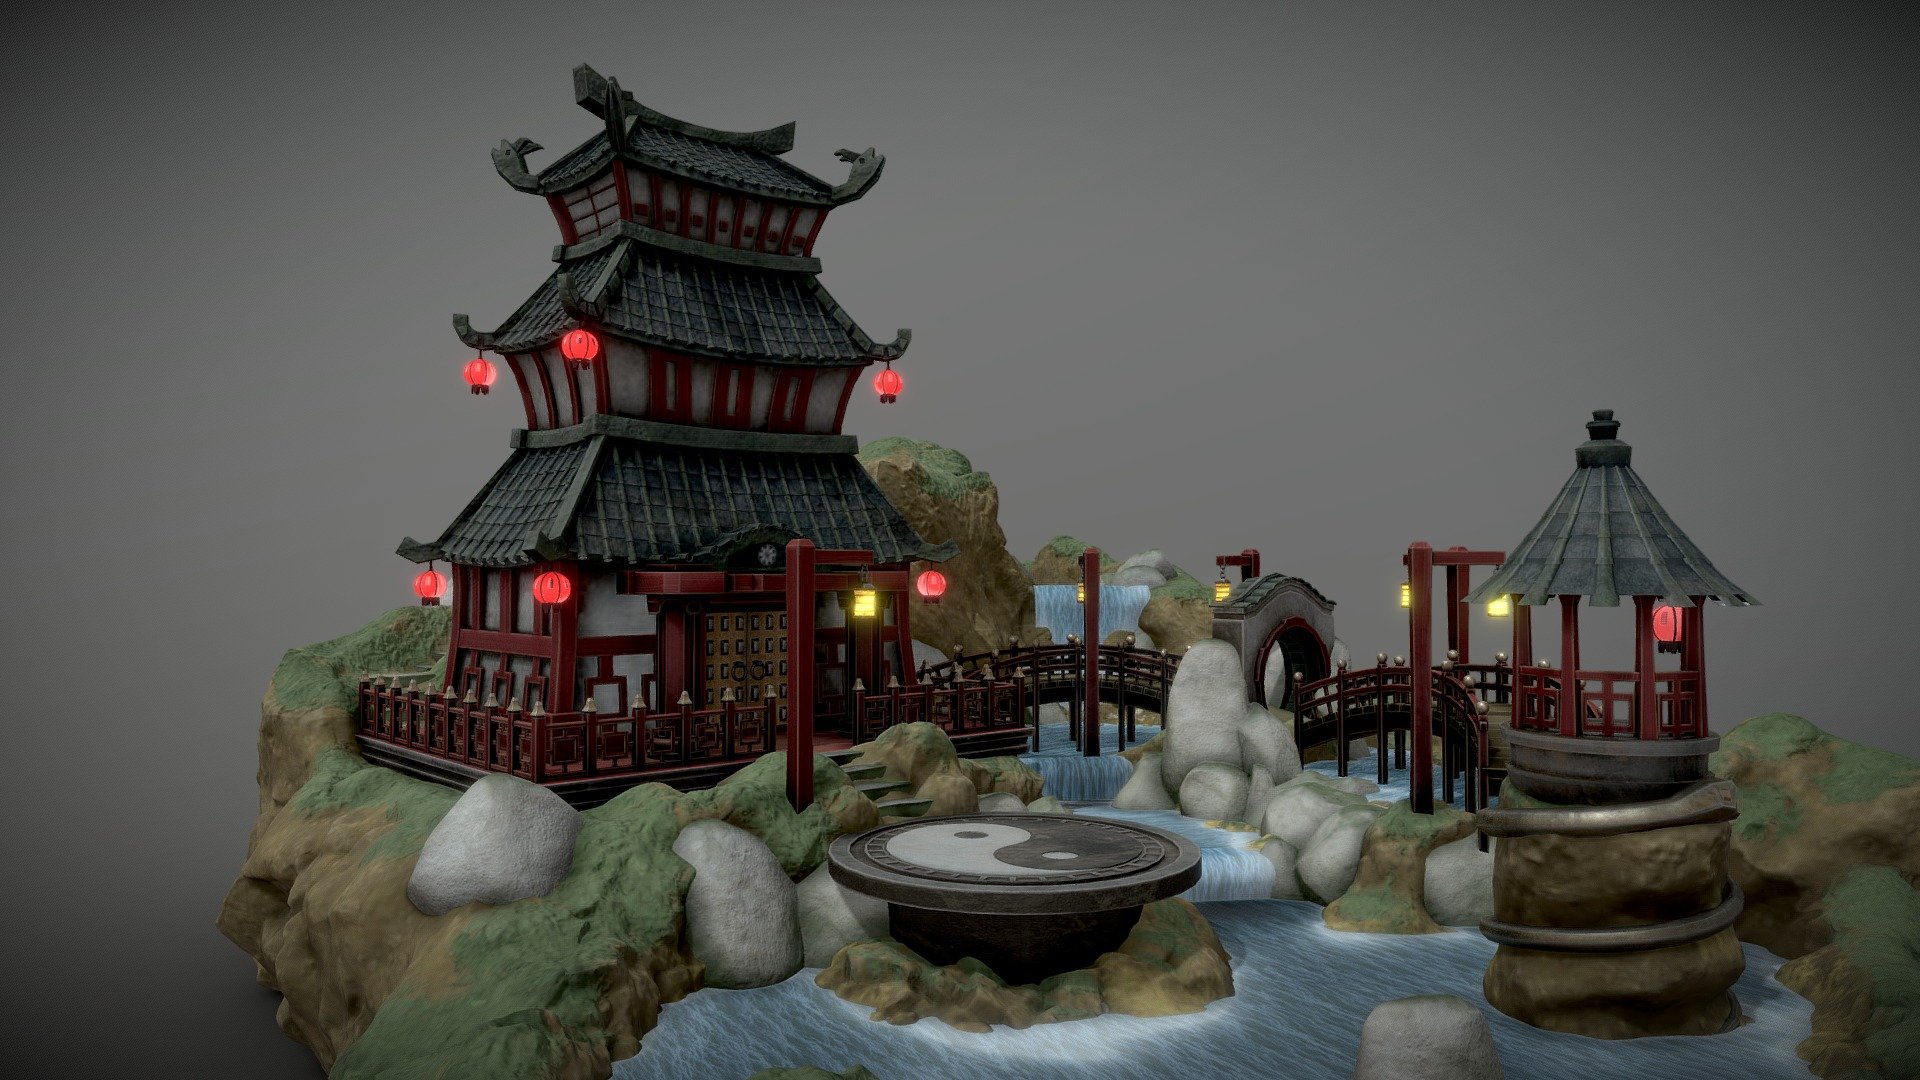 Stylized Oriental Garden Model &amp; Complete Guide



Youtube complete Guide to this Model Link: https://youtu.be/5REz8Hty6ws

This is the .blend file  that contains everything we created in our YouTube video.  This is a packed Blend file and has been cleaned up.  This makes sure there are no unnecessary files, materials, etc.  Everything in the .blend file is also organised into collections and named correctly.  This pack also contains all of the Unreal engine texture maps so you can build your project with these assets.  We have also included in this pack the Unreal Engine complete project.

All models you see in the thumbnail are fully textured

100 X Blender Textures Maps

1 X Packed Blend File

41 X UE5 Packed Texture Maps

1 X Unreal Engine 5 (Complete Project) - Stylized Oriental Garden Model & Complete Guide - Buy Royalty Free 3D model by 3D Tudor (@3DTudor) 3d model